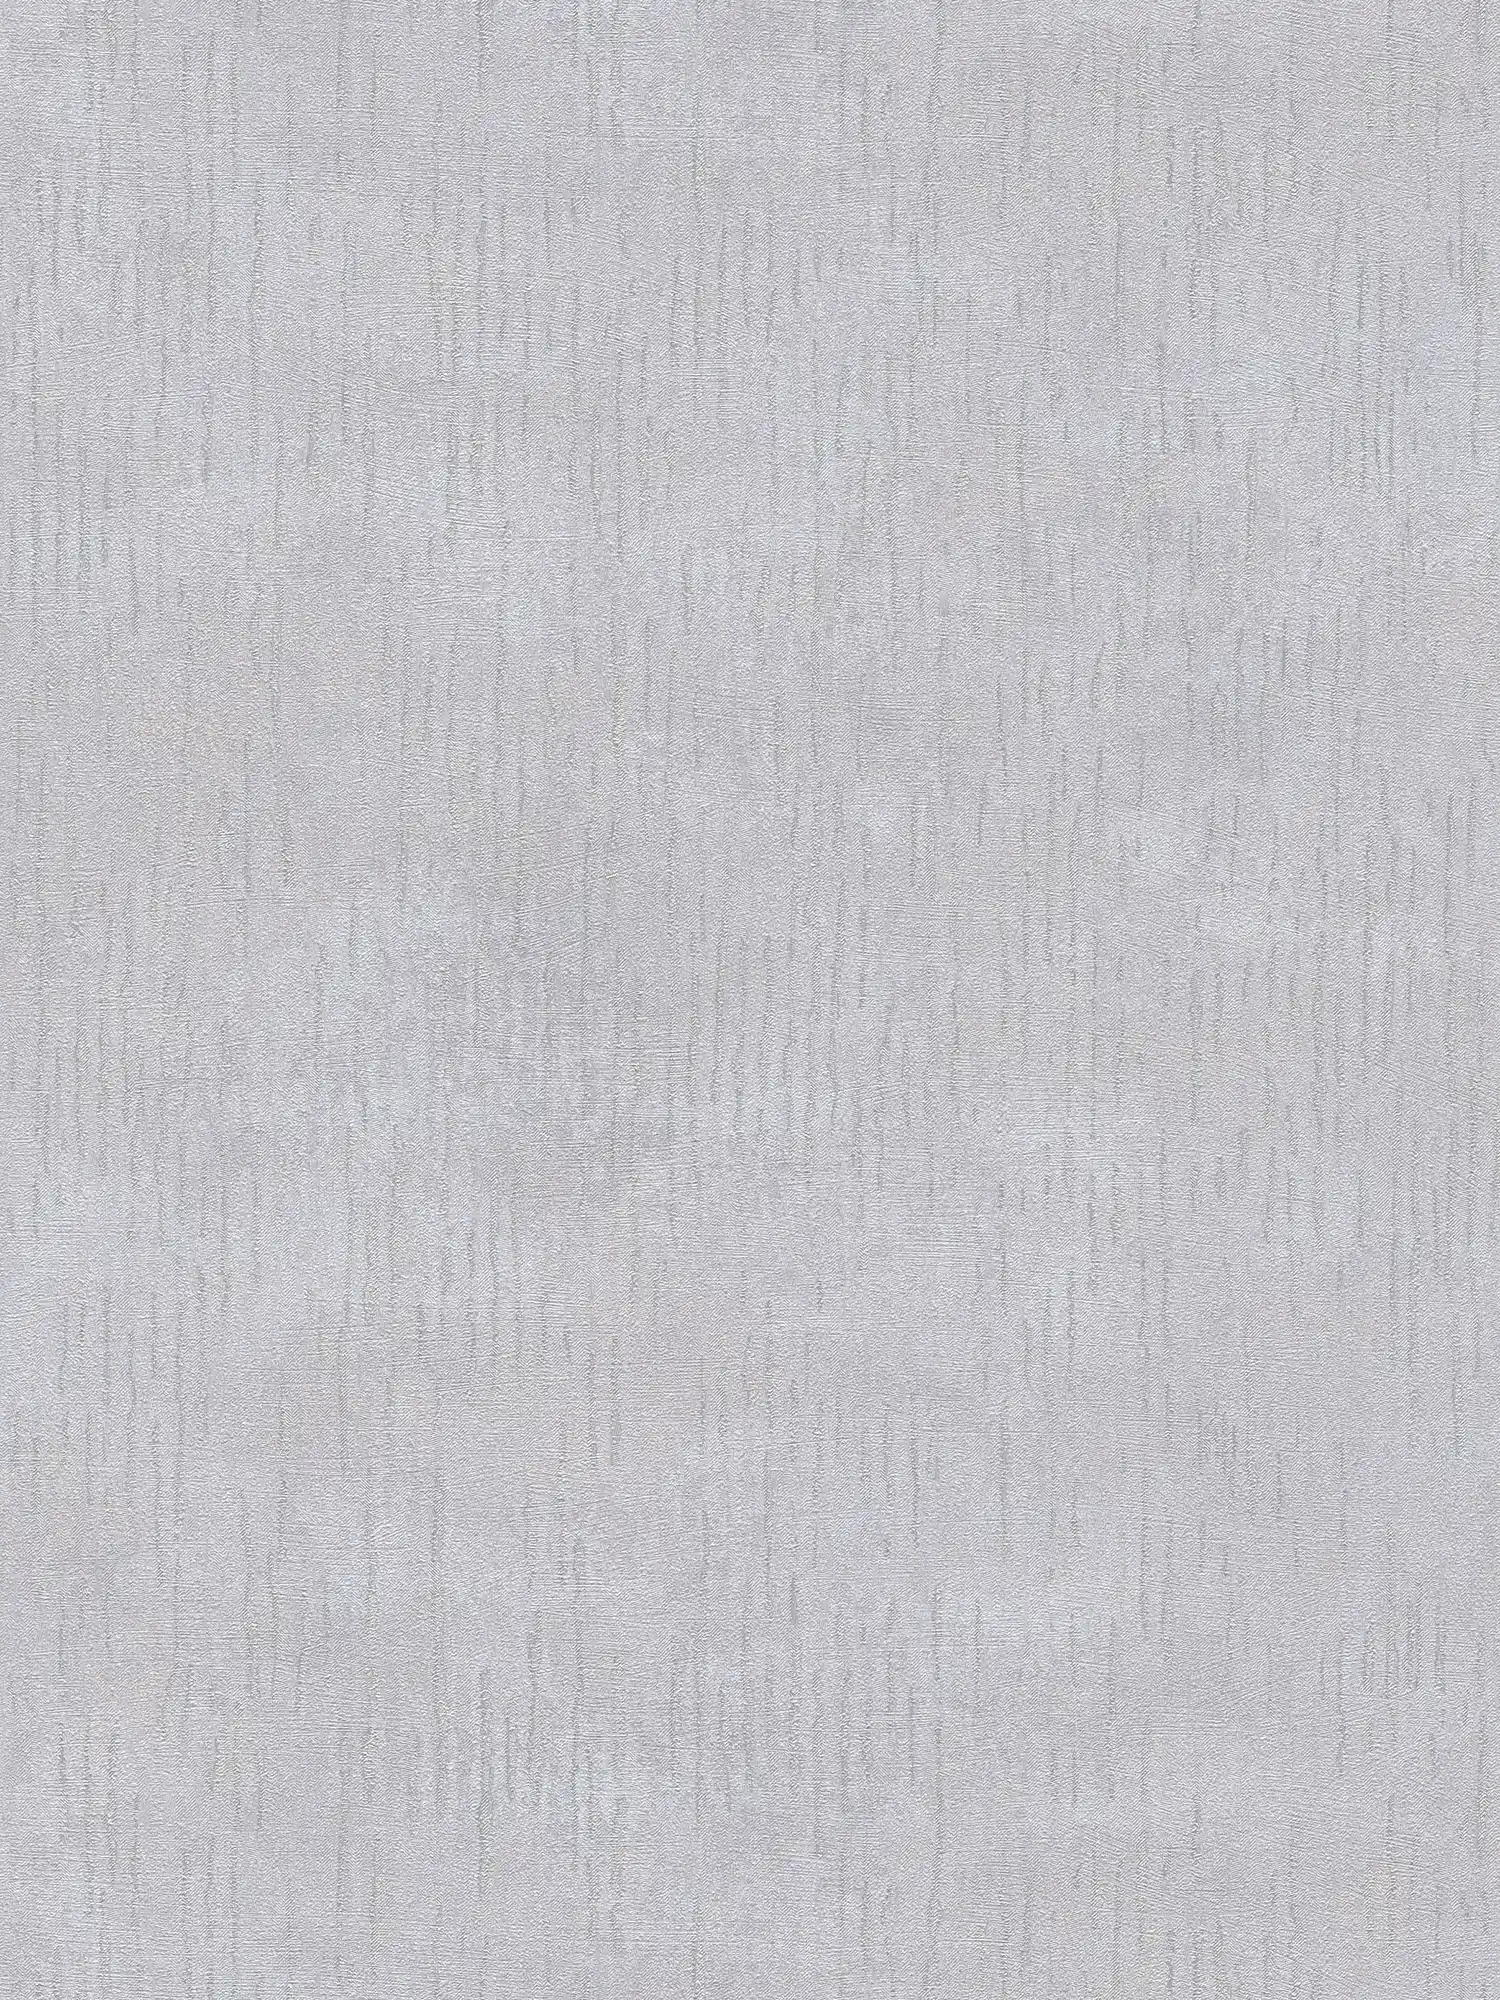 Patterned gloss wallpaper with texture design - grey, metallic
